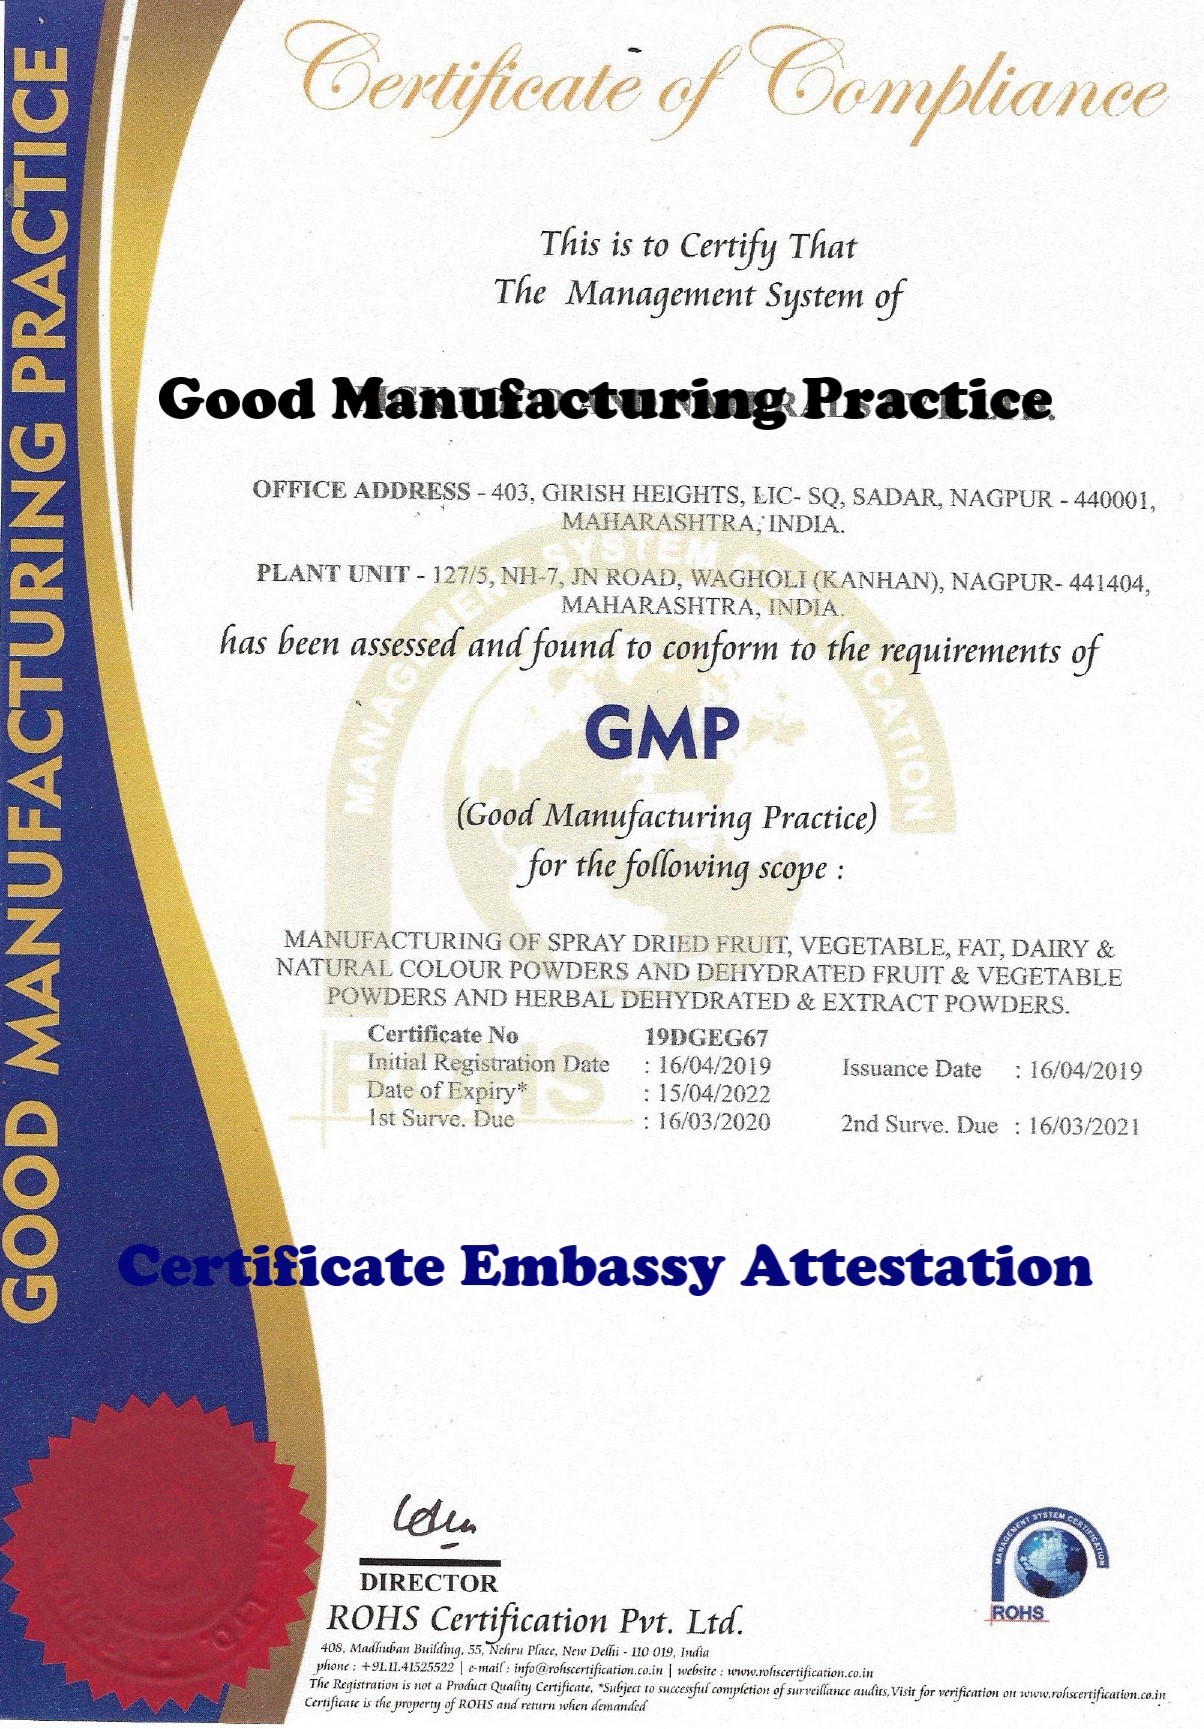 GMP Certificate Attestation from Eswatini Embassy